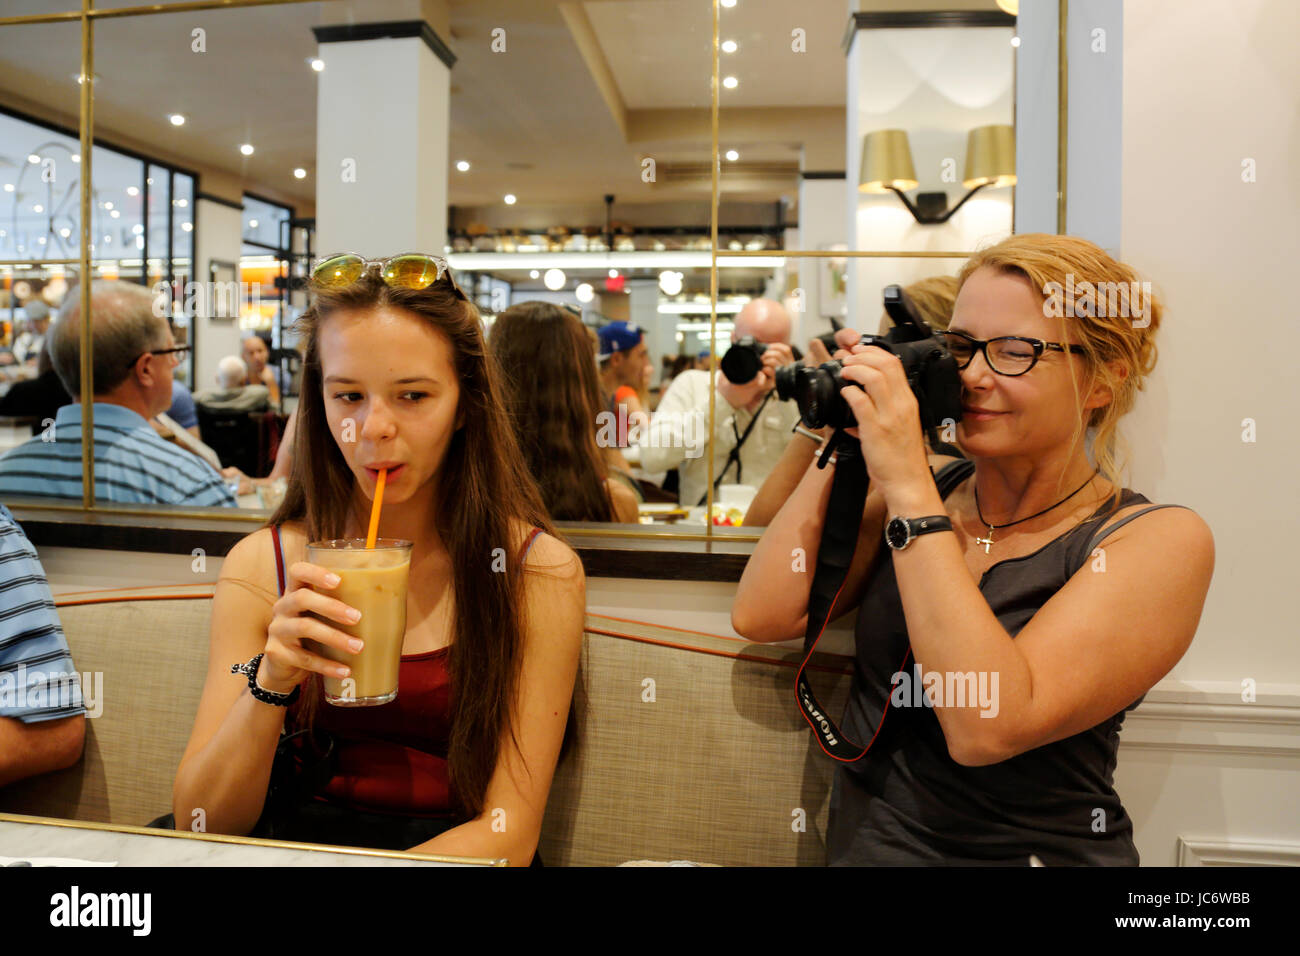 Tourists. Mather and Daughter. Inside coffee shop. Manhattan. New York City. US 17, 18, 19, 20, 21, 25, 40, 44, 45, 49, 50, 54, years, years old Stock Photo